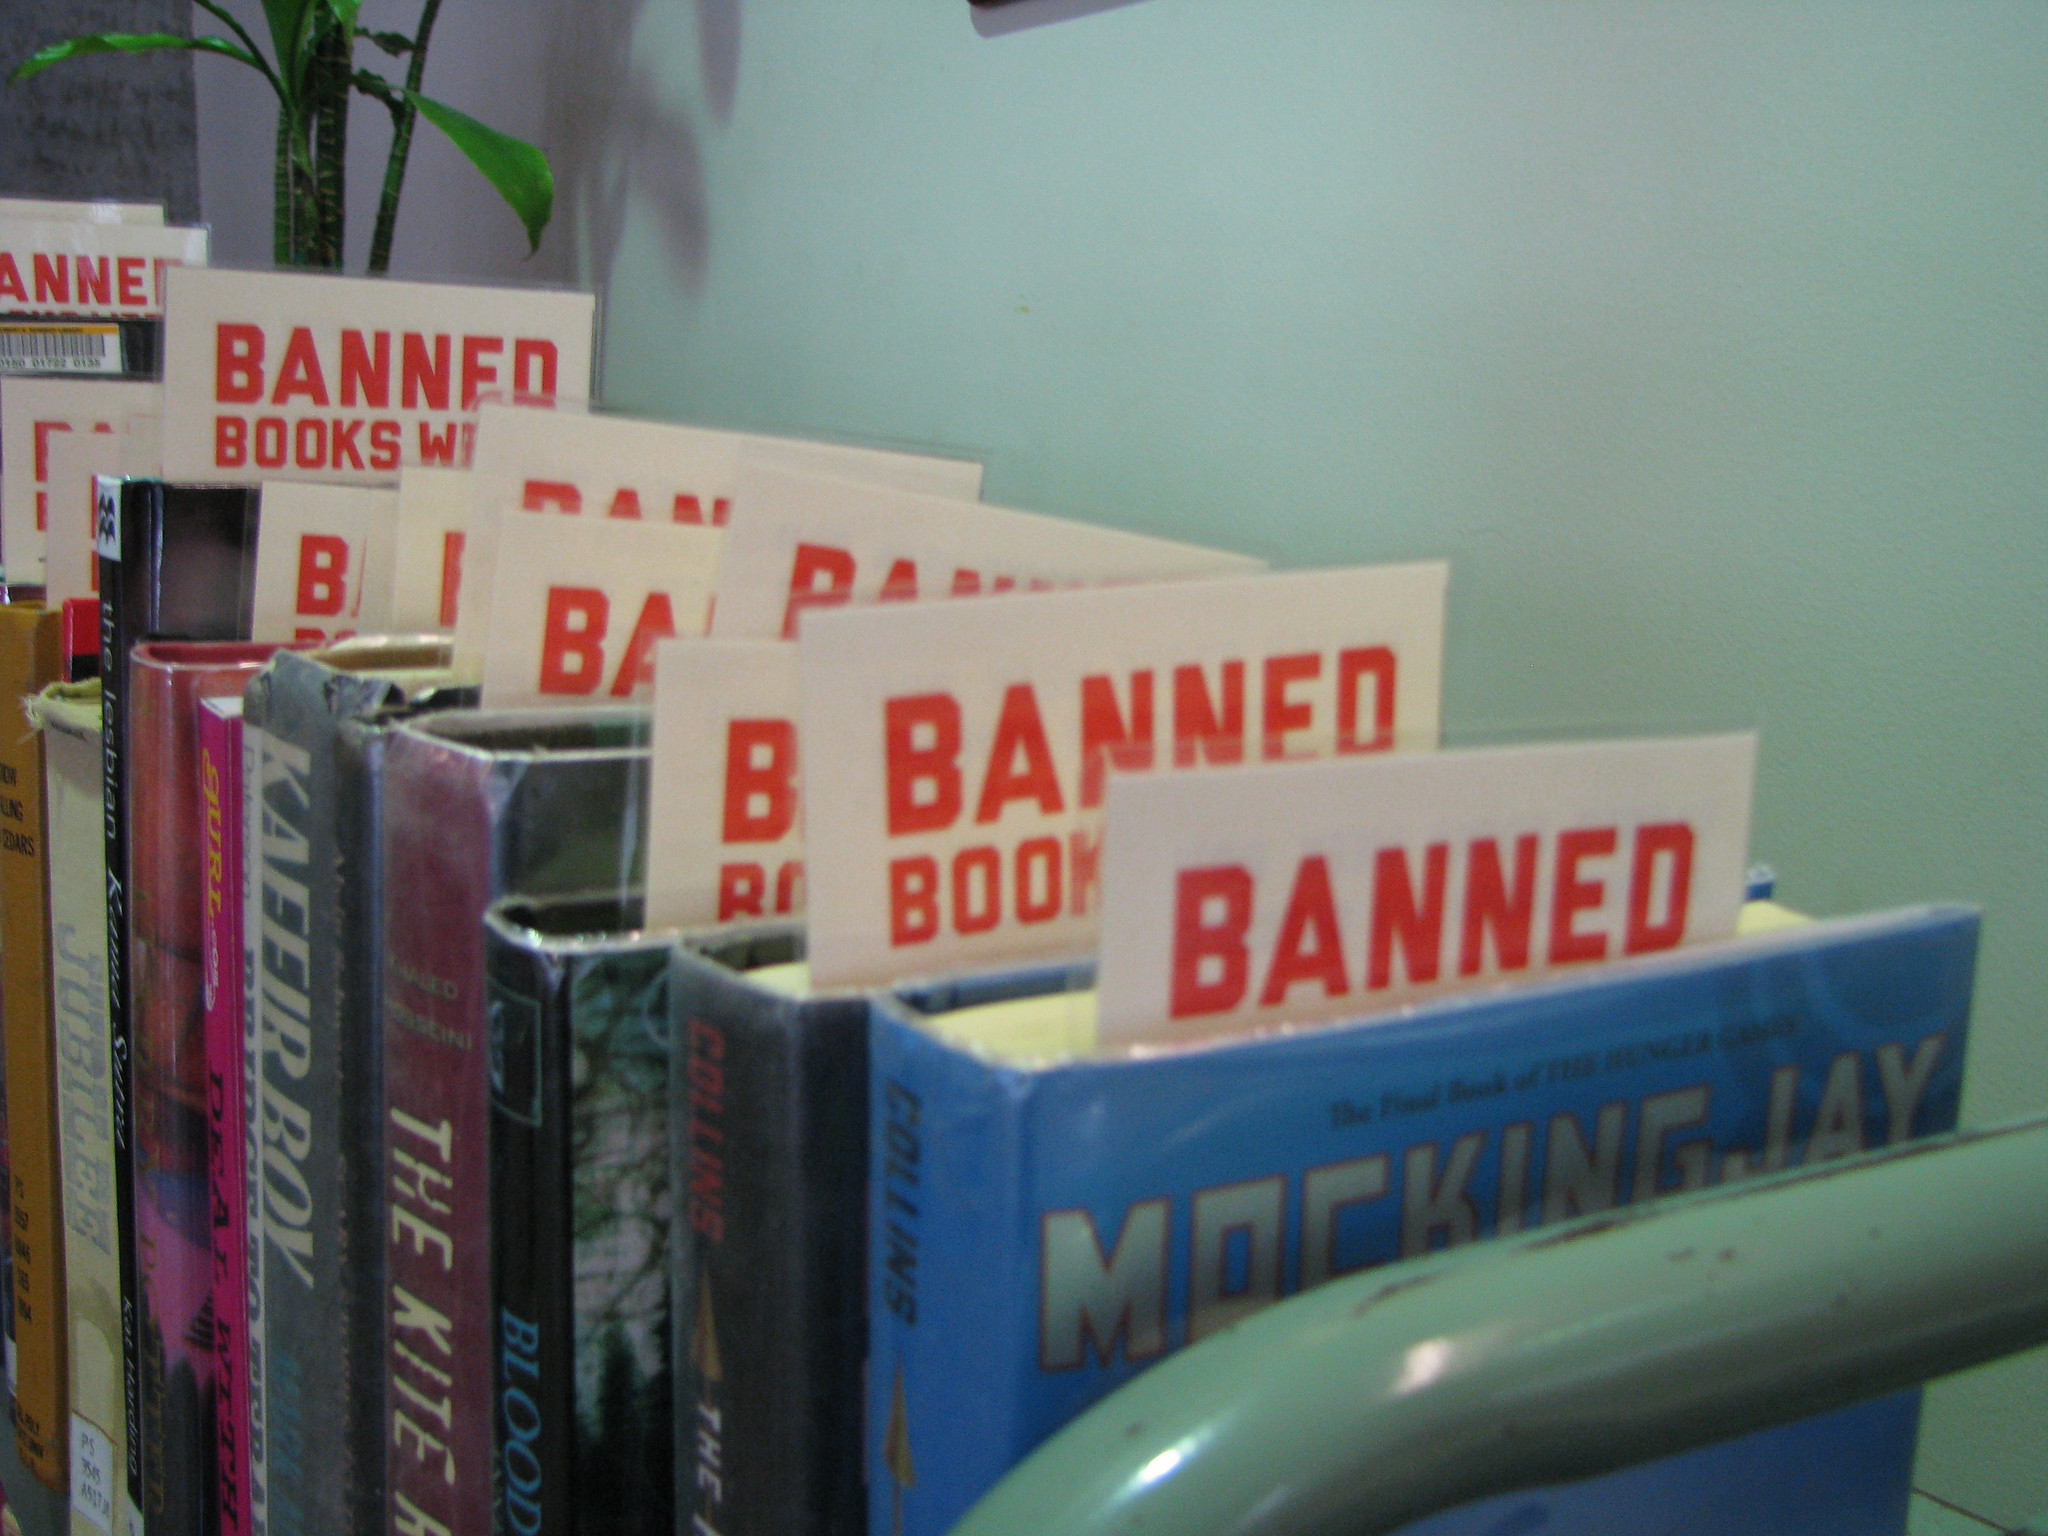 All lose out when books are banned